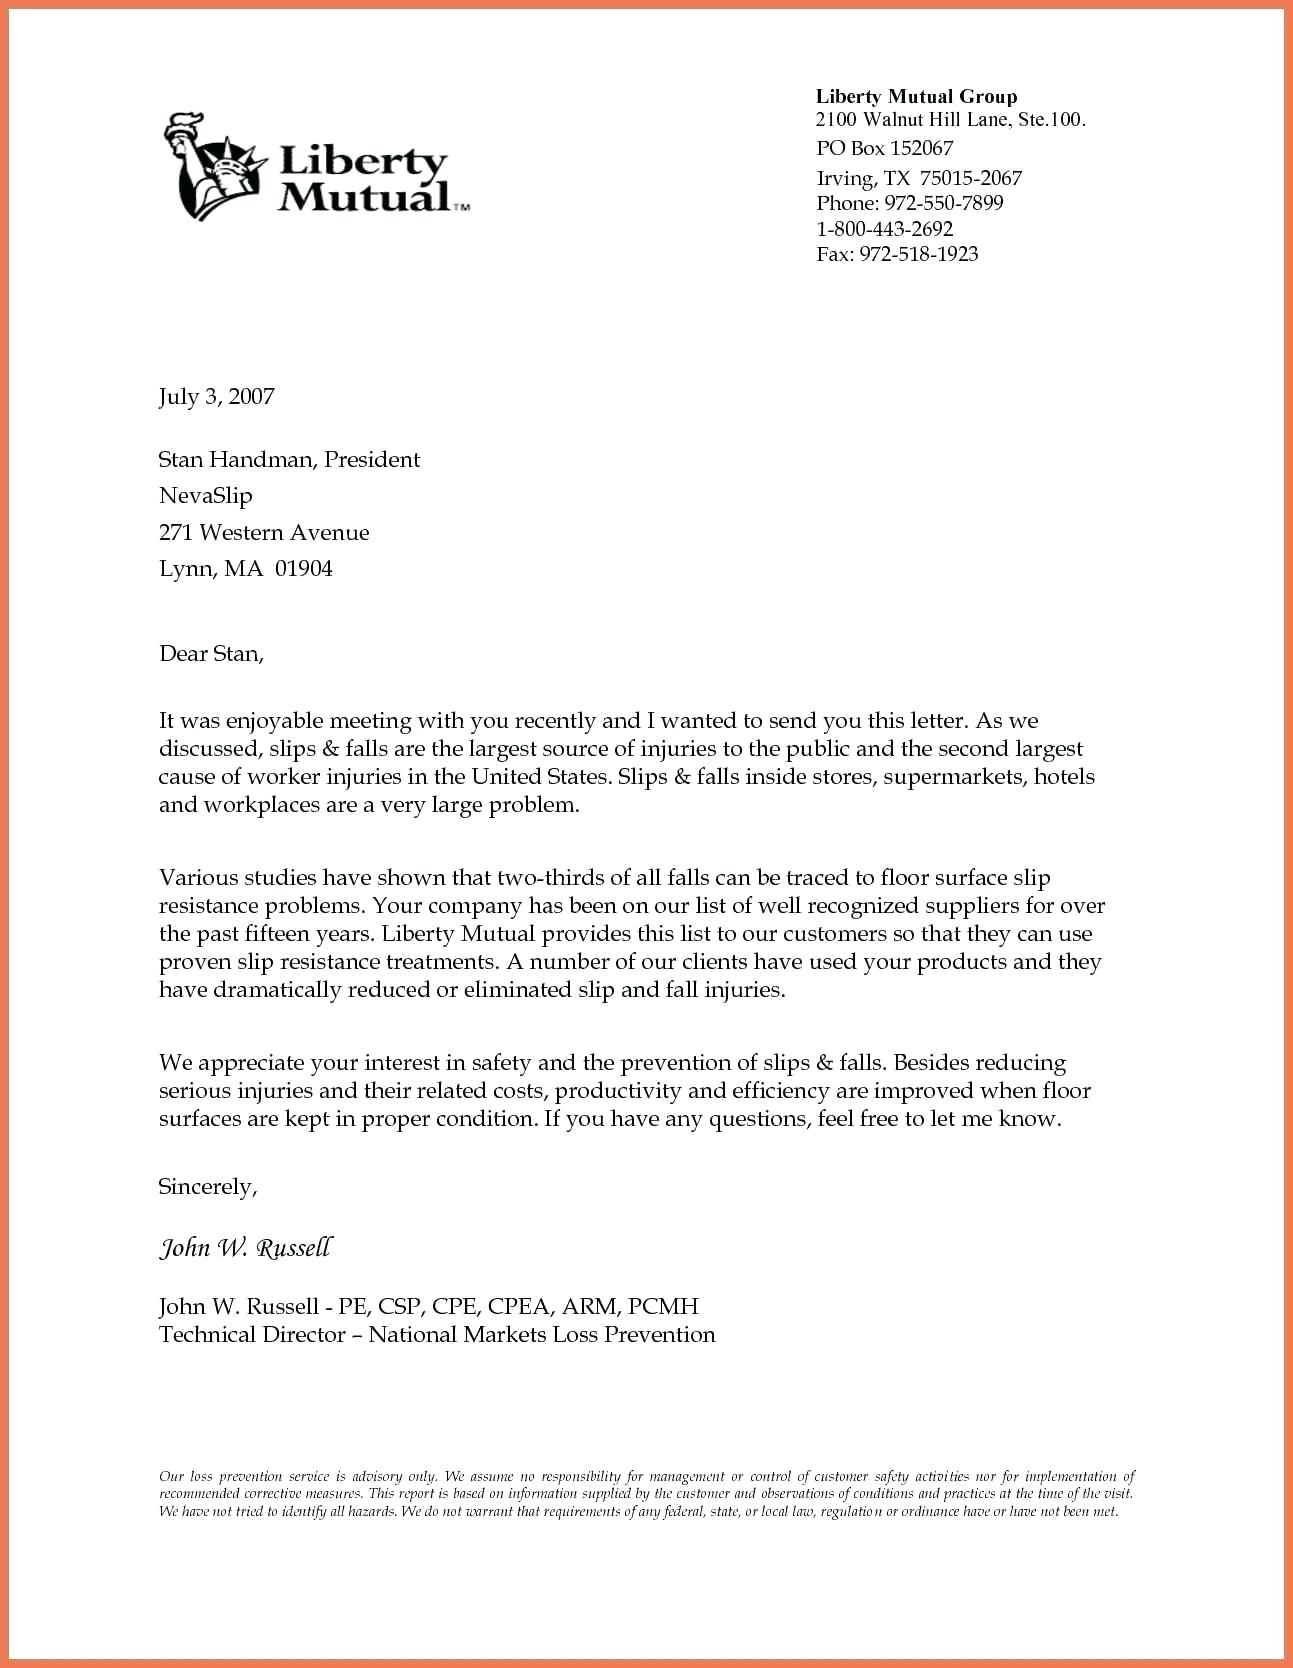 35 Formal / Business Letter Format Templates & Examples   Template Lab